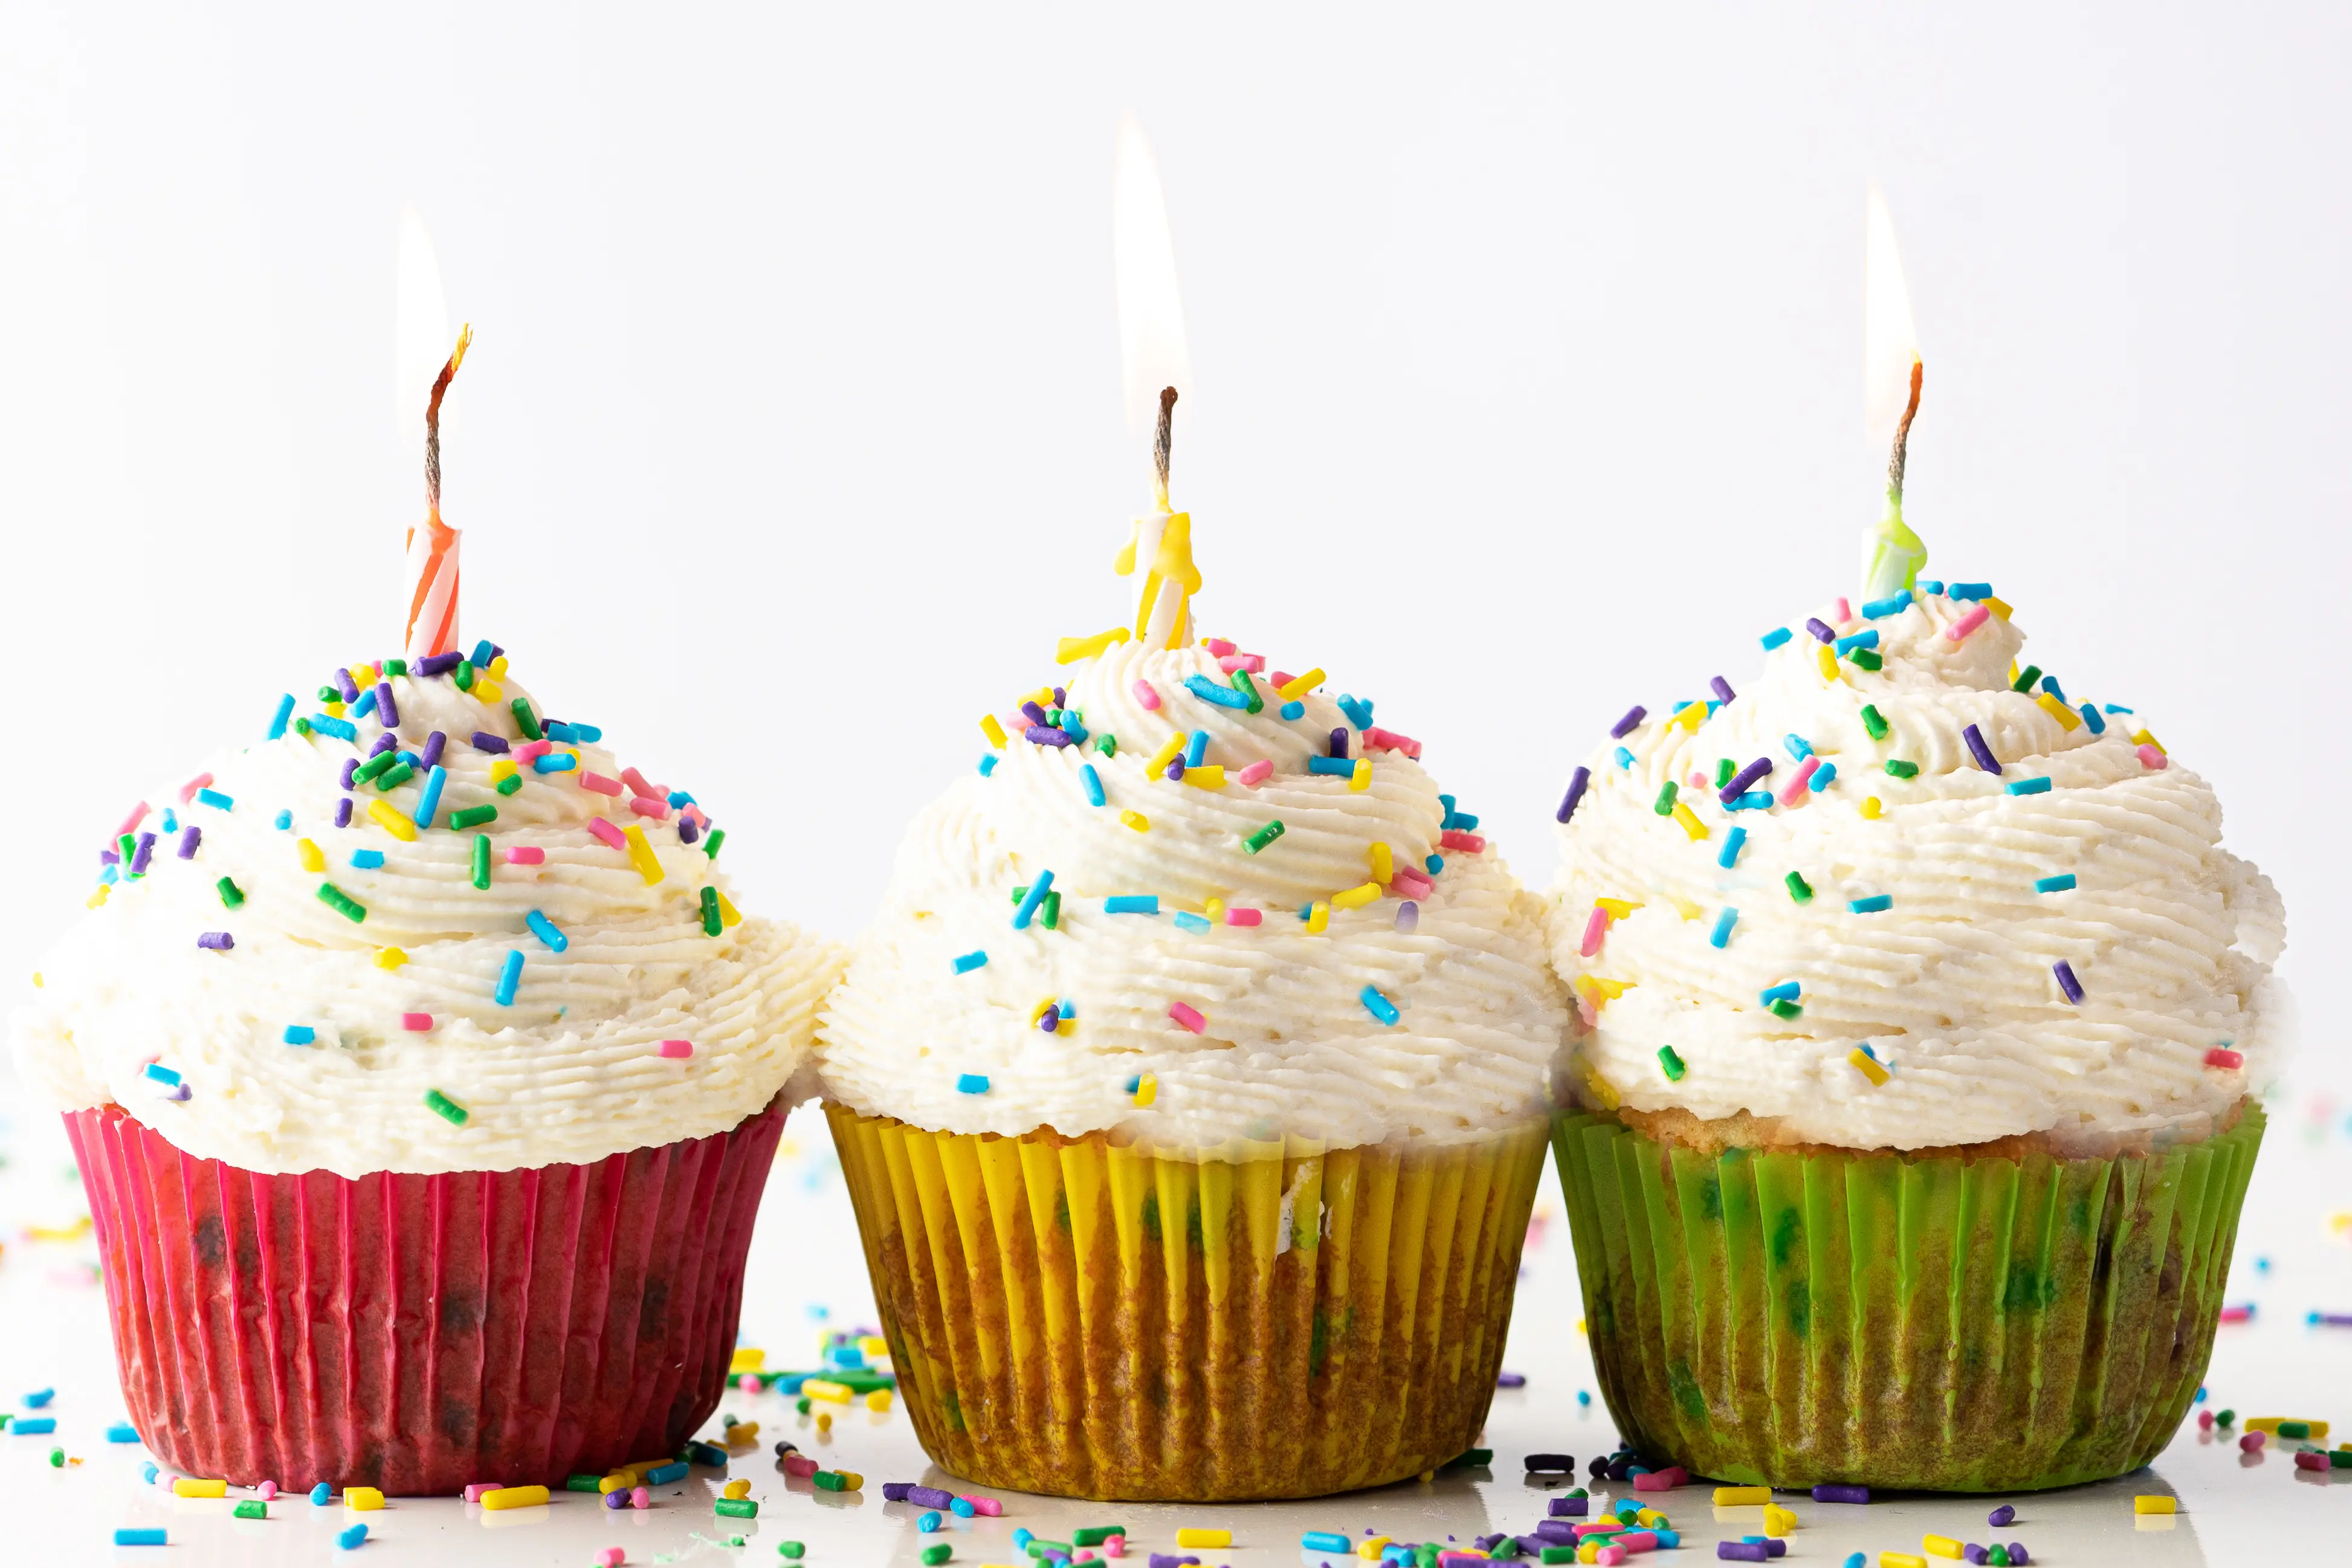 Three vanilla frosted cupcakes in colorful cupcake wrappers.  The cupcakes have cheerful sprinkles and lit birthday candles.